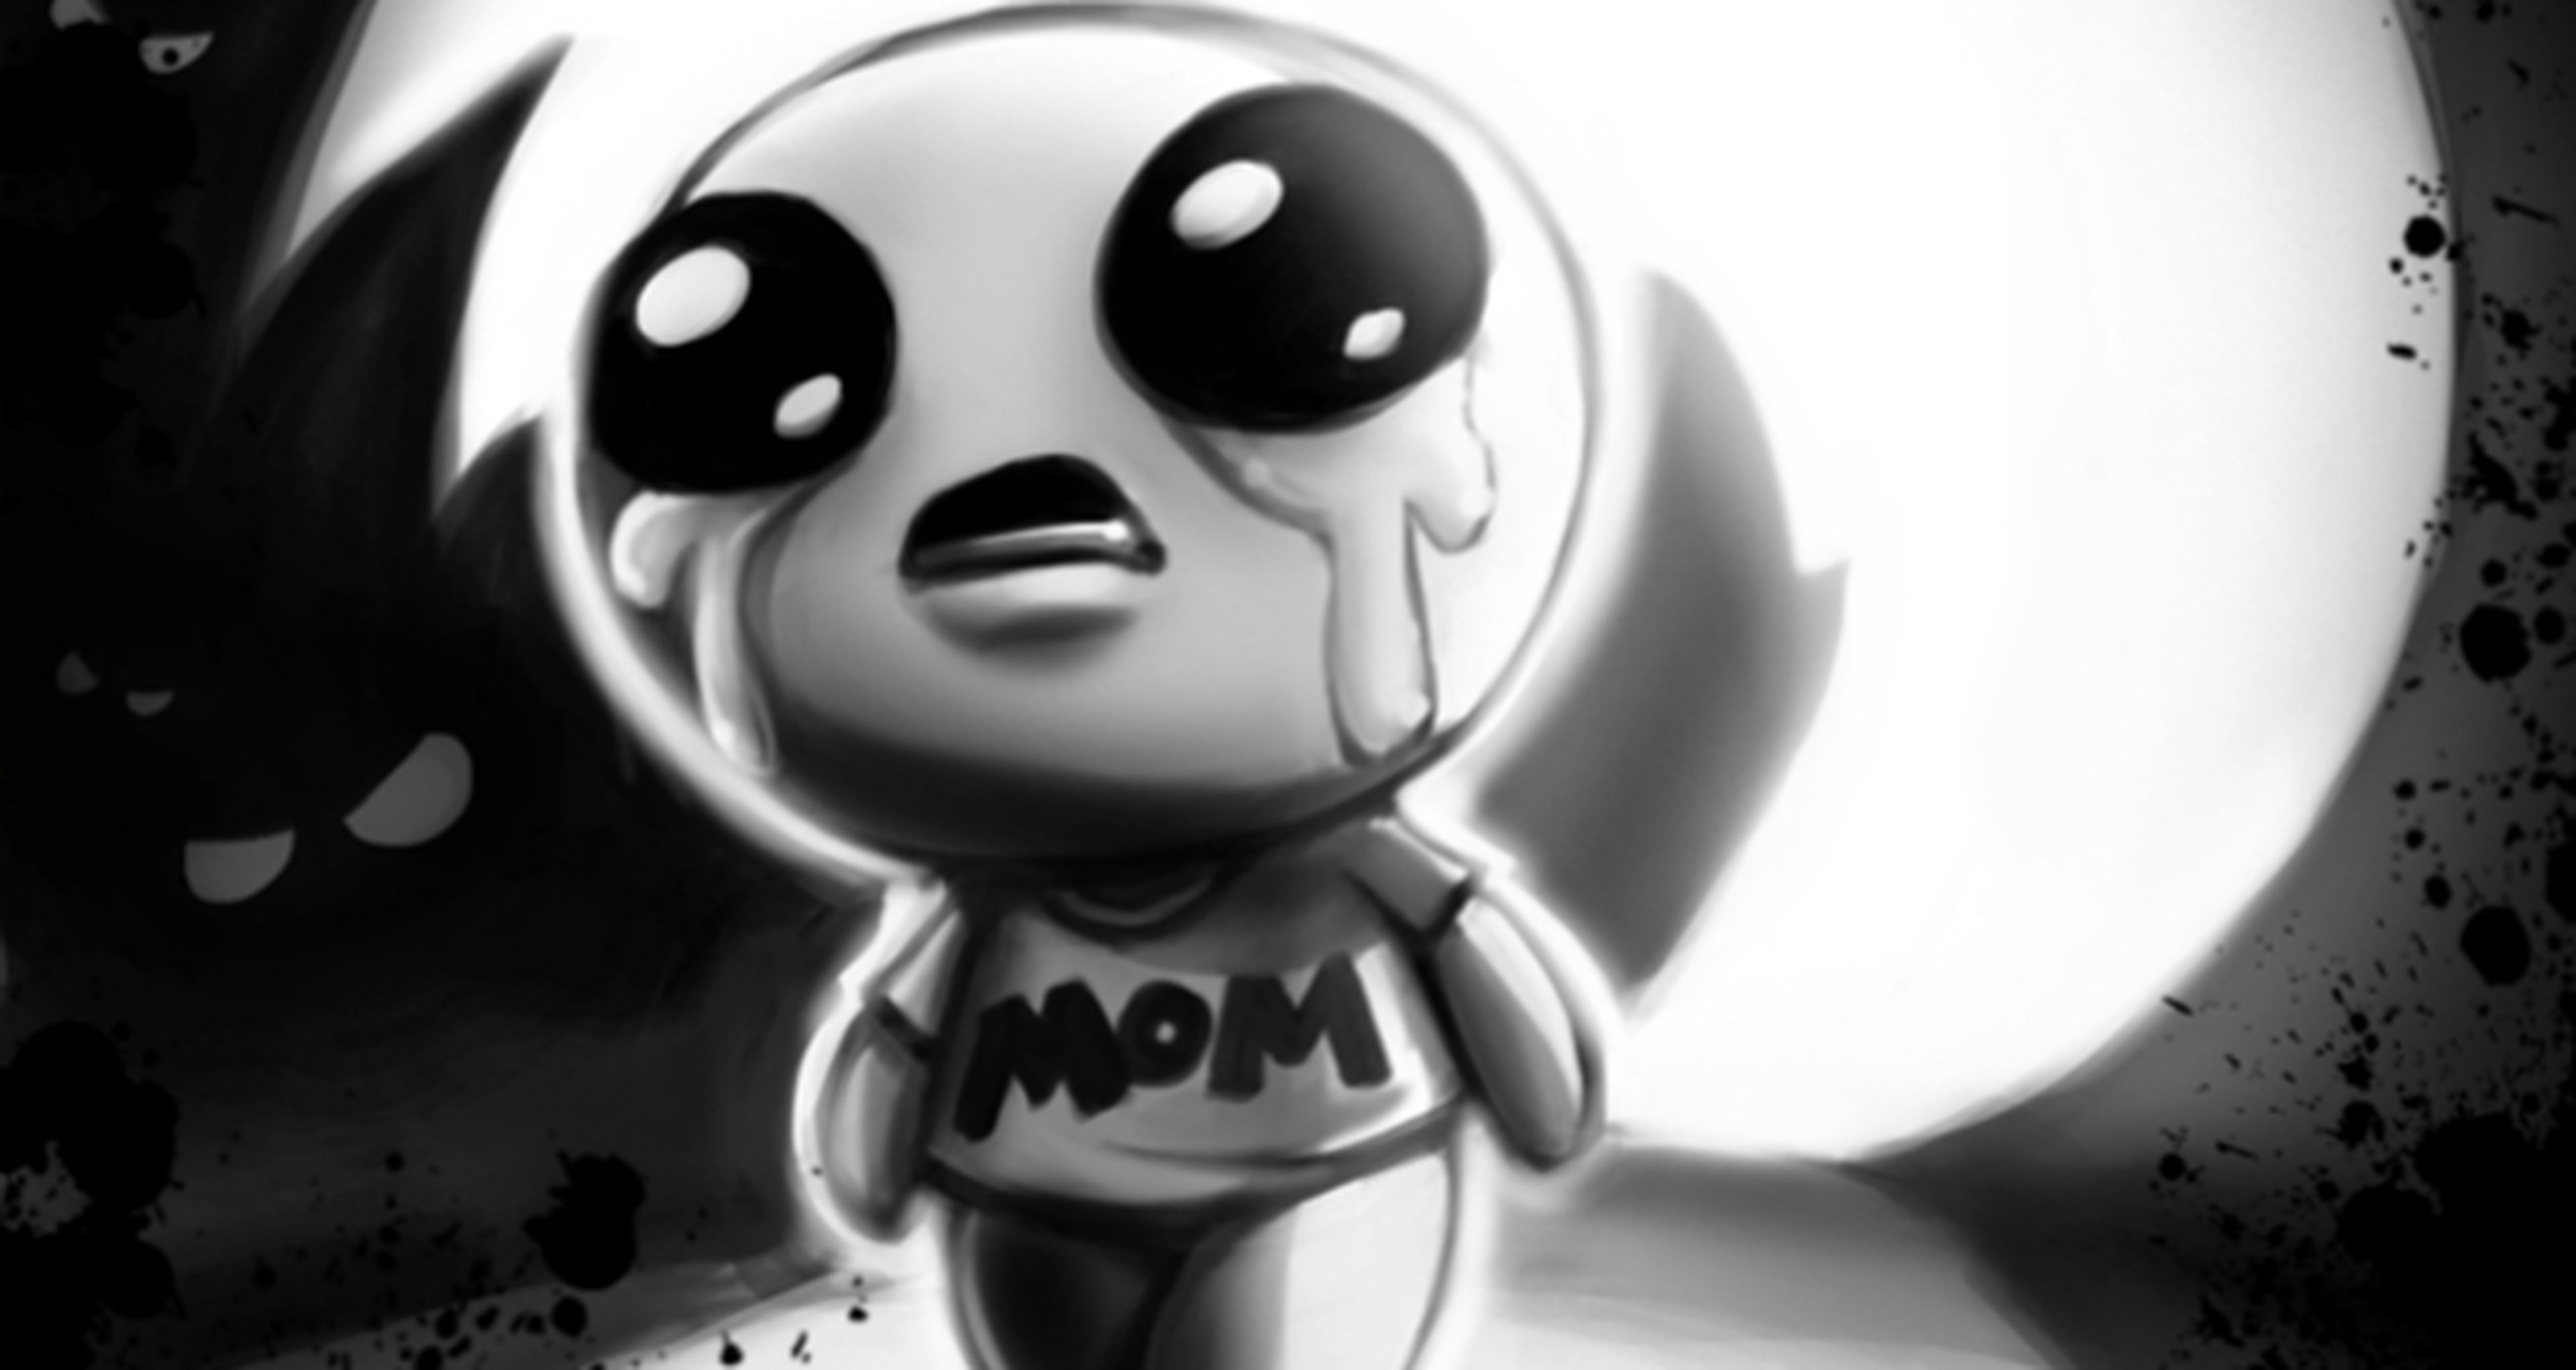 The Binding of Isaac rumbo a consolas